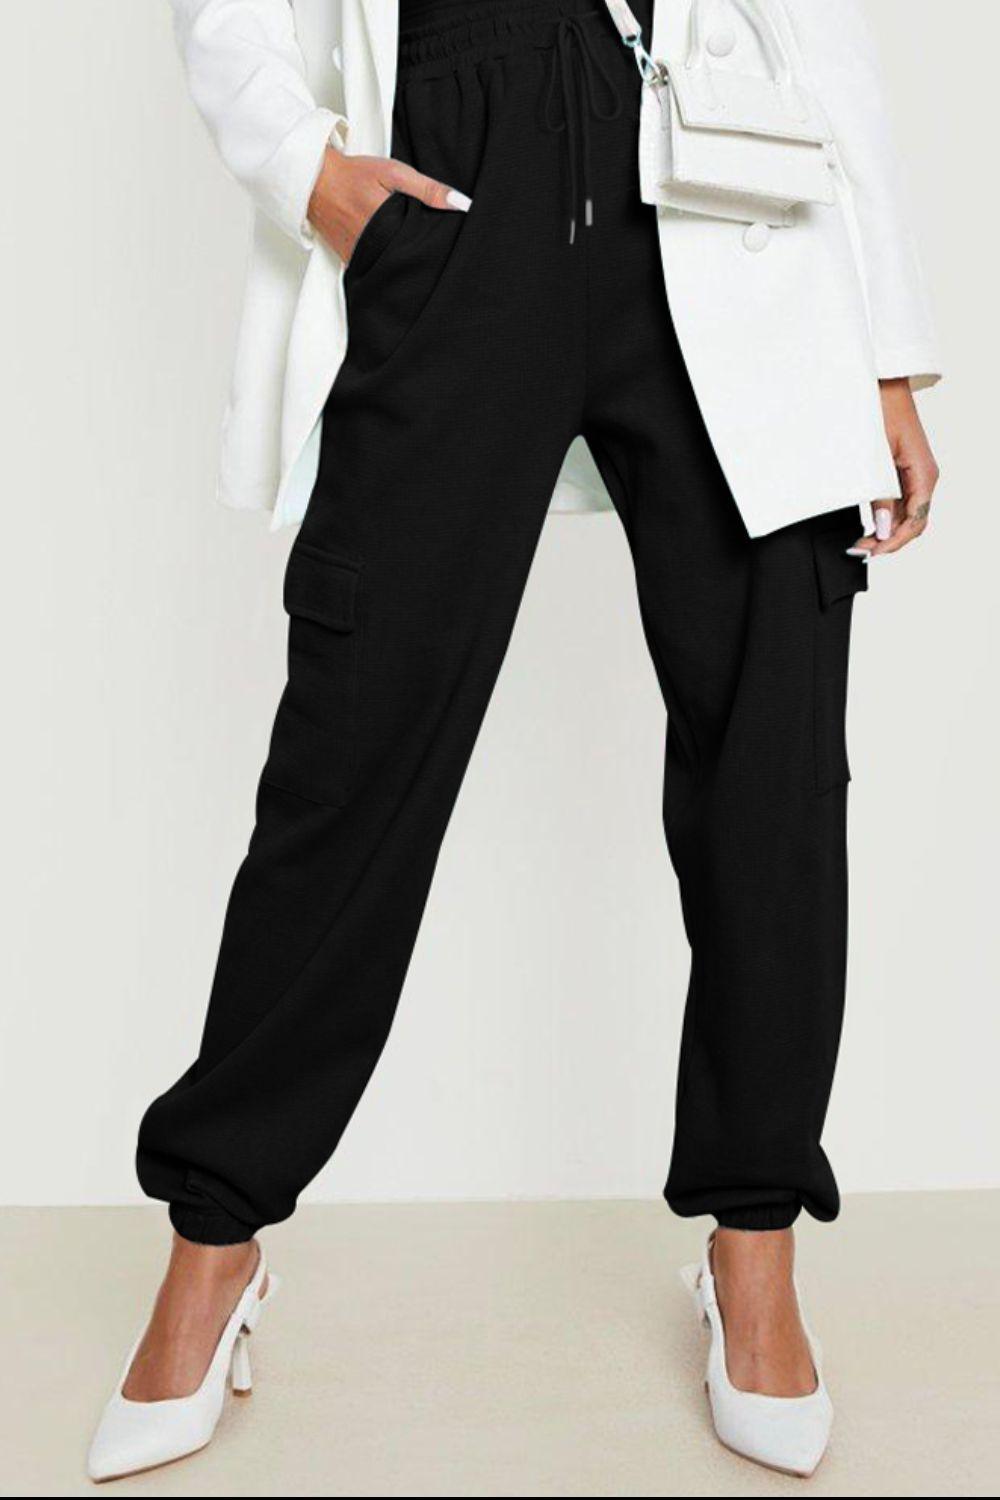 a woman in a white jacket and black pants